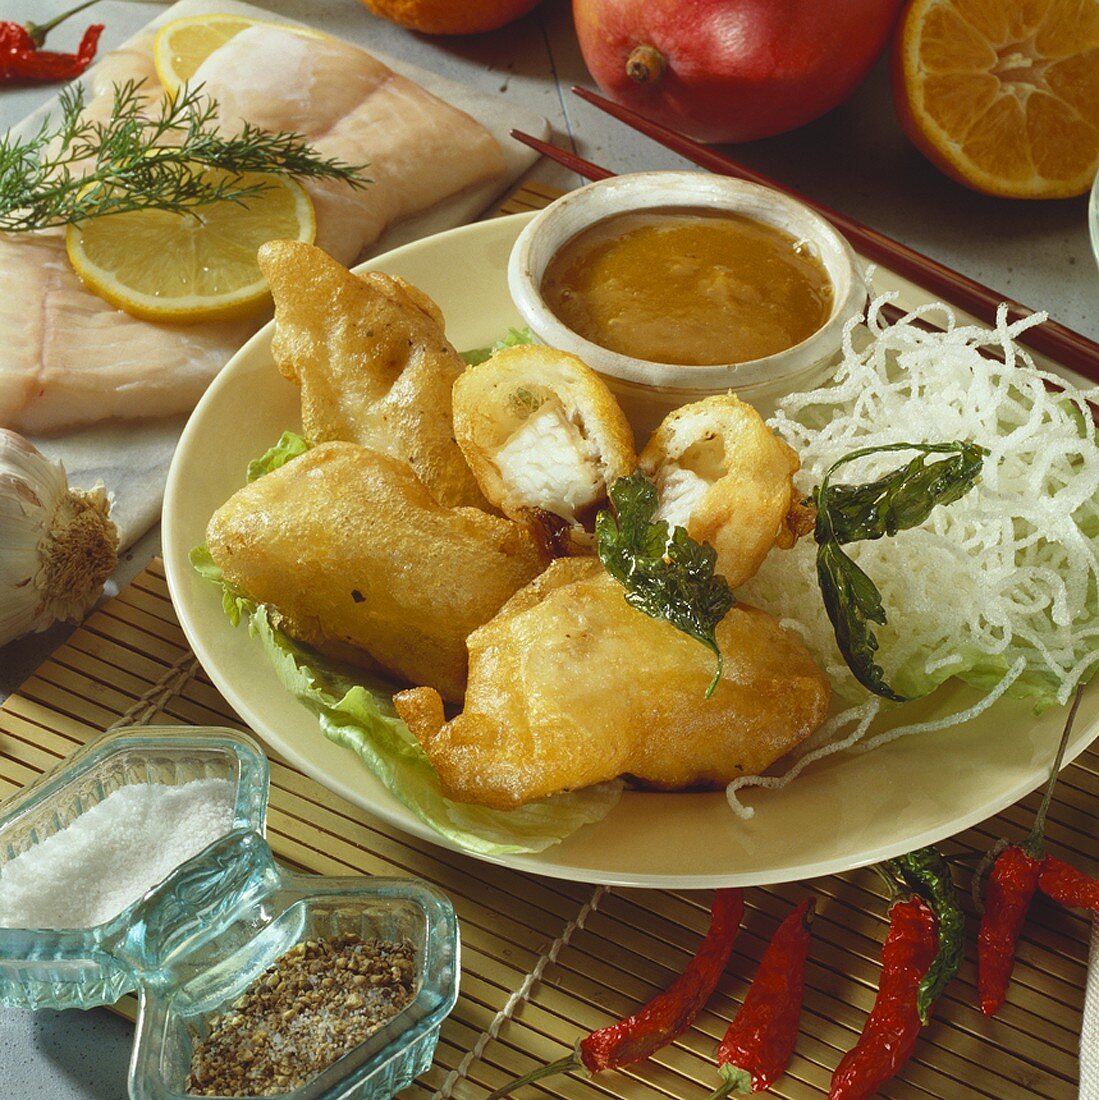 Fish in batter and deep-fried glass noodles